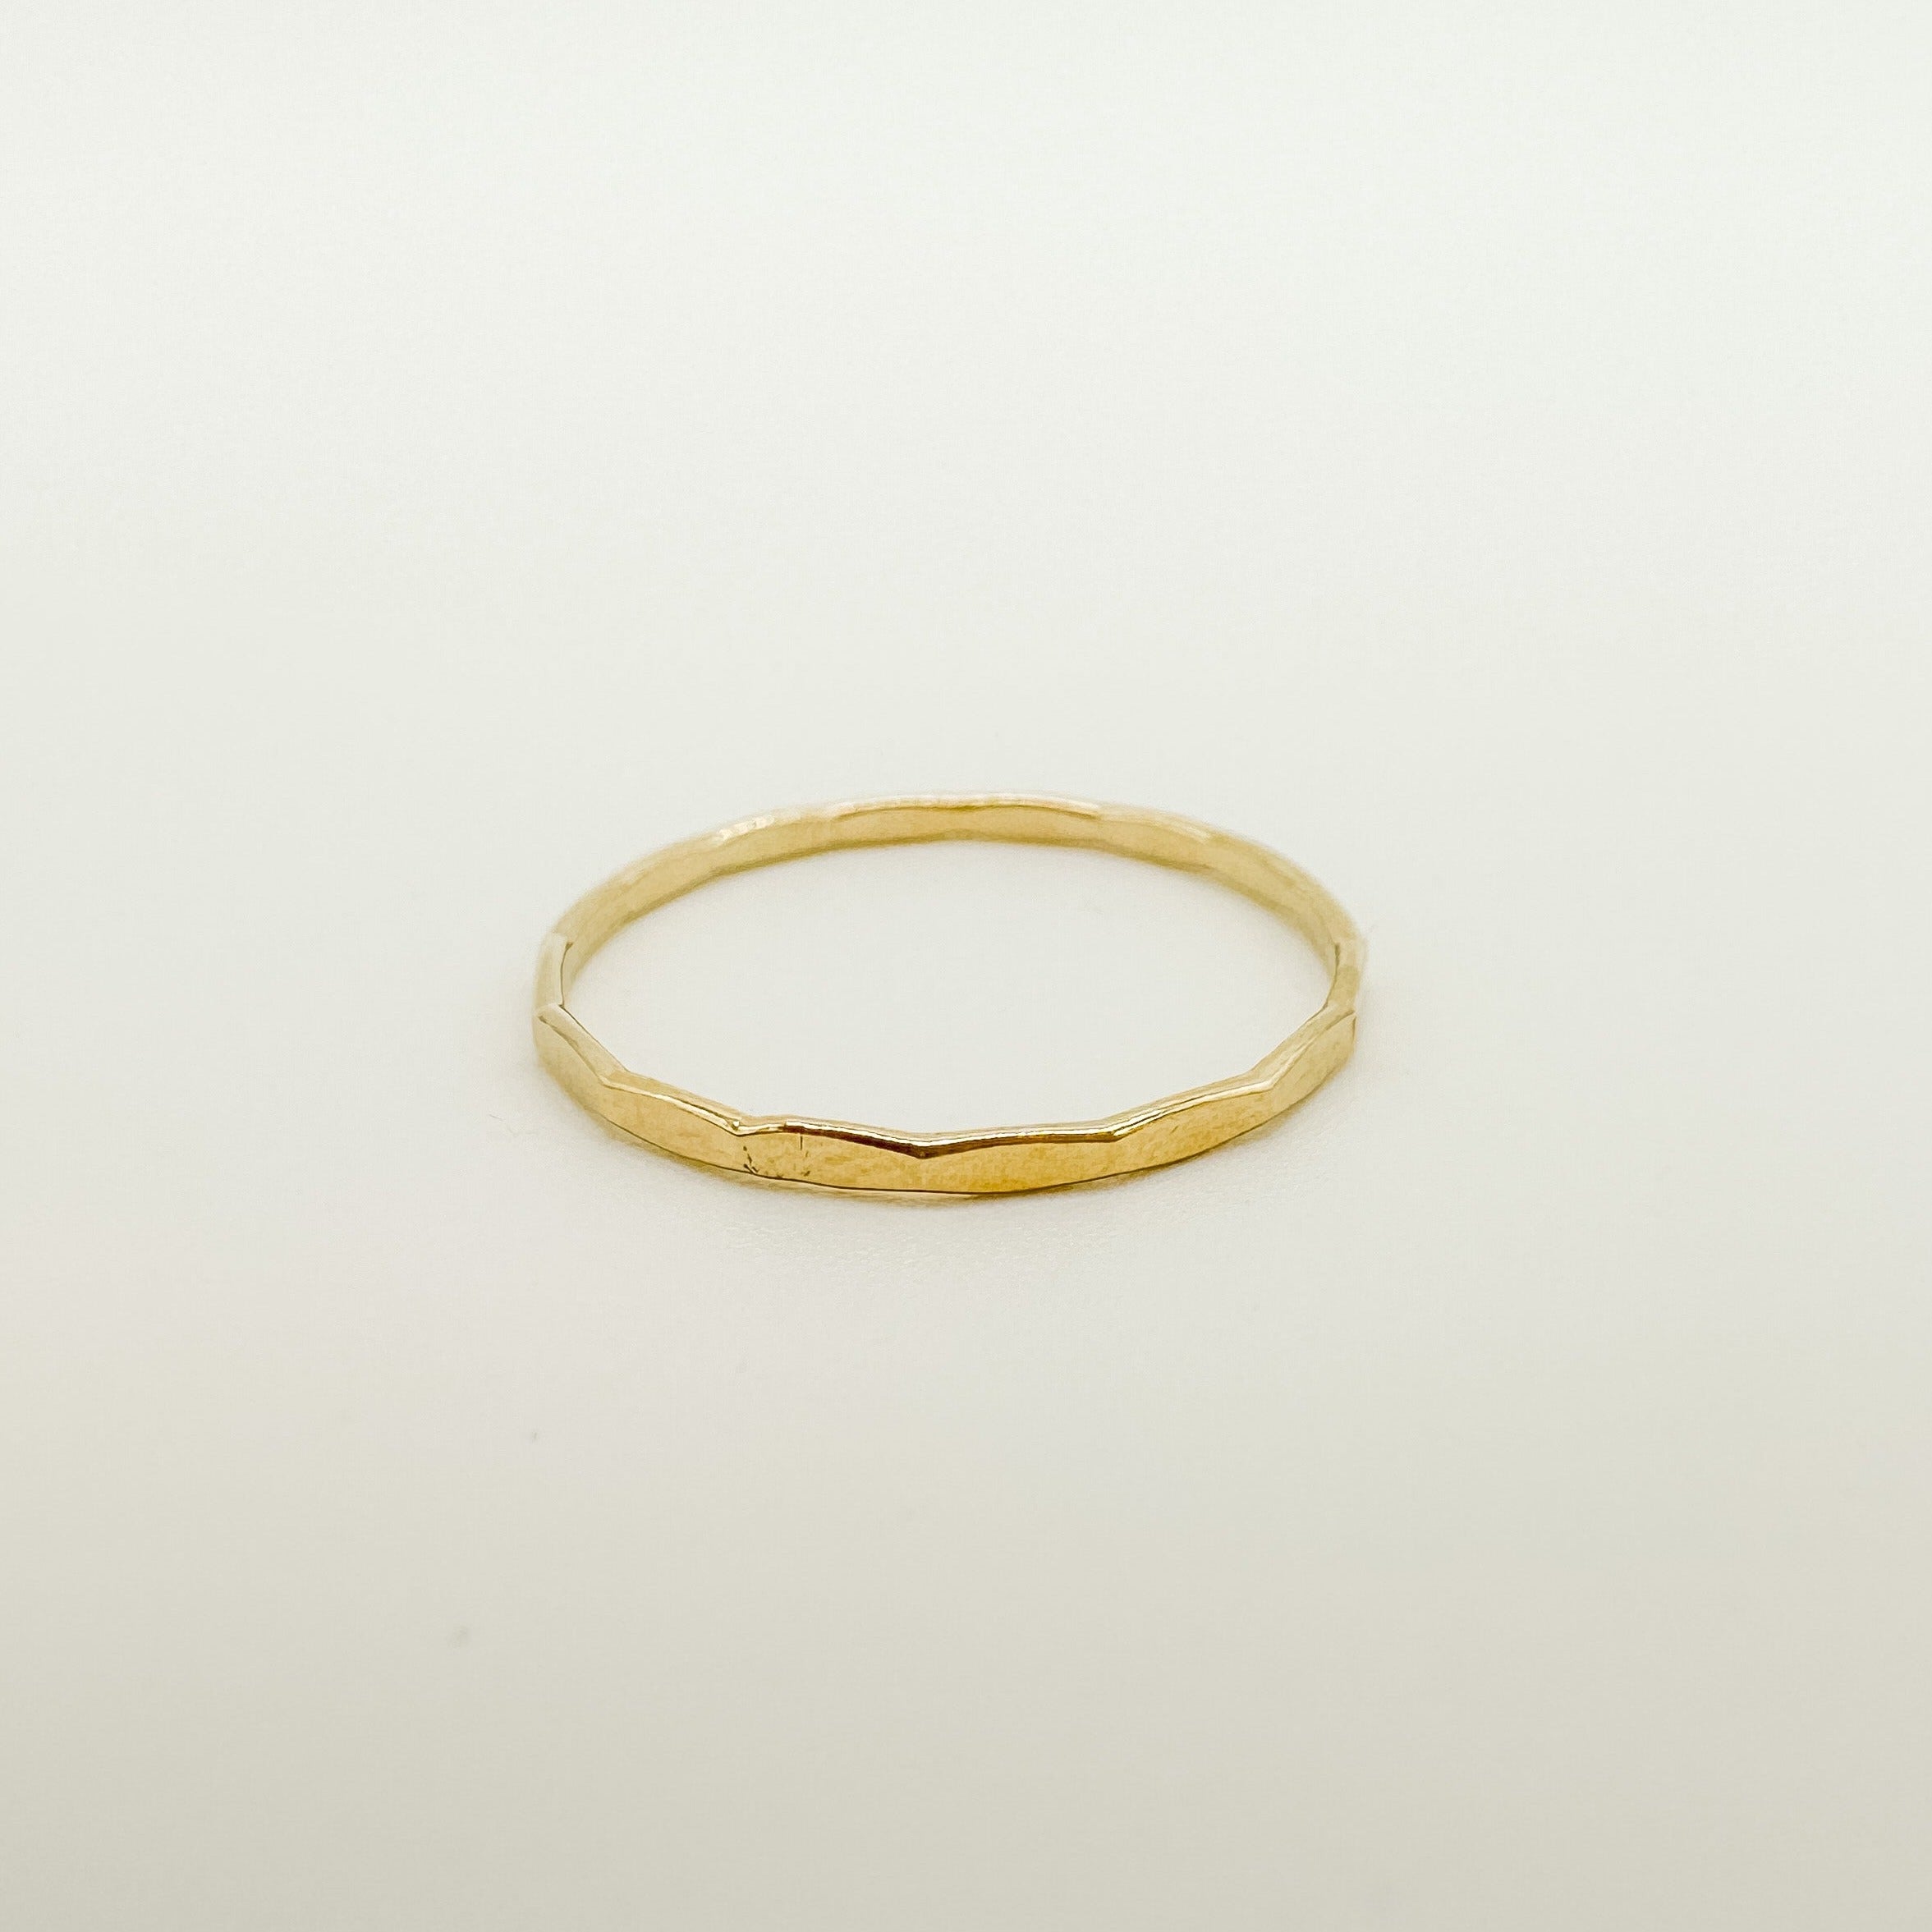 gold filled stacking rings / permanent jewelry business / rings for permanent jewelry / gold filled ring